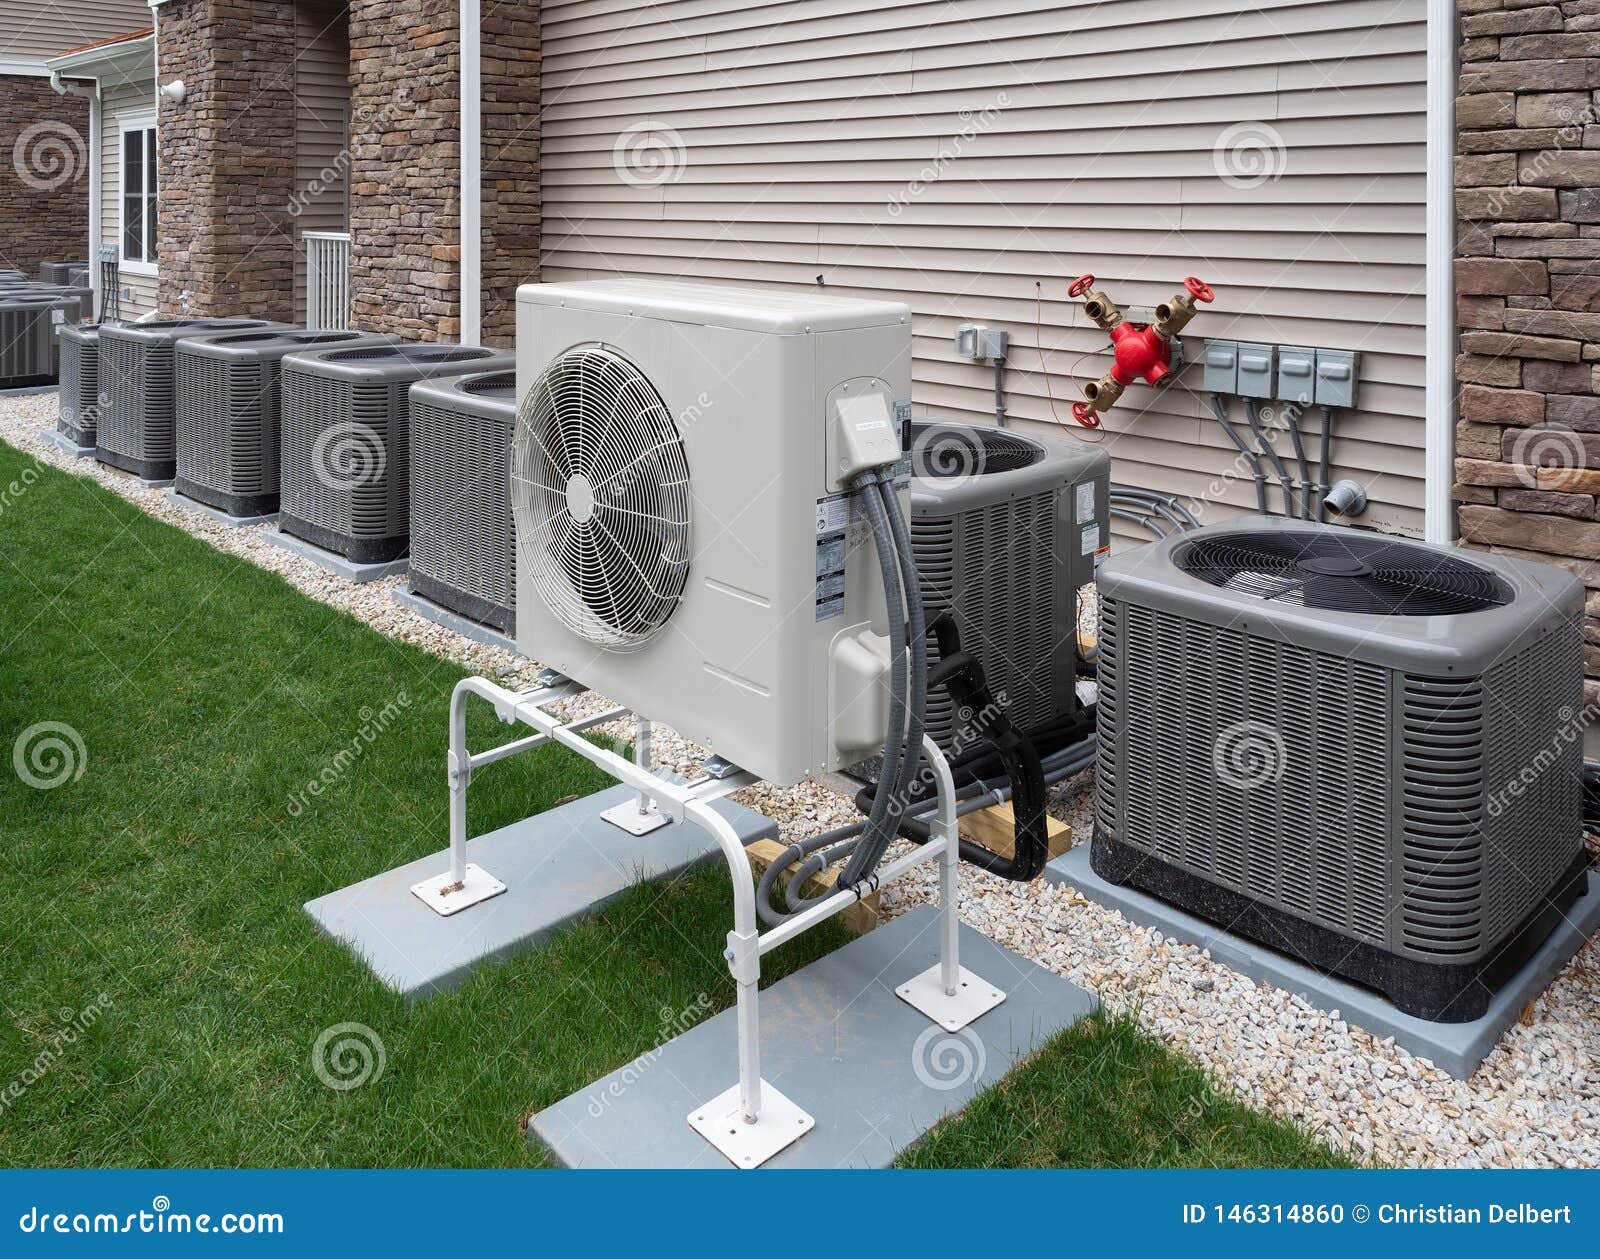 outdoor air conditioning and heat pump units